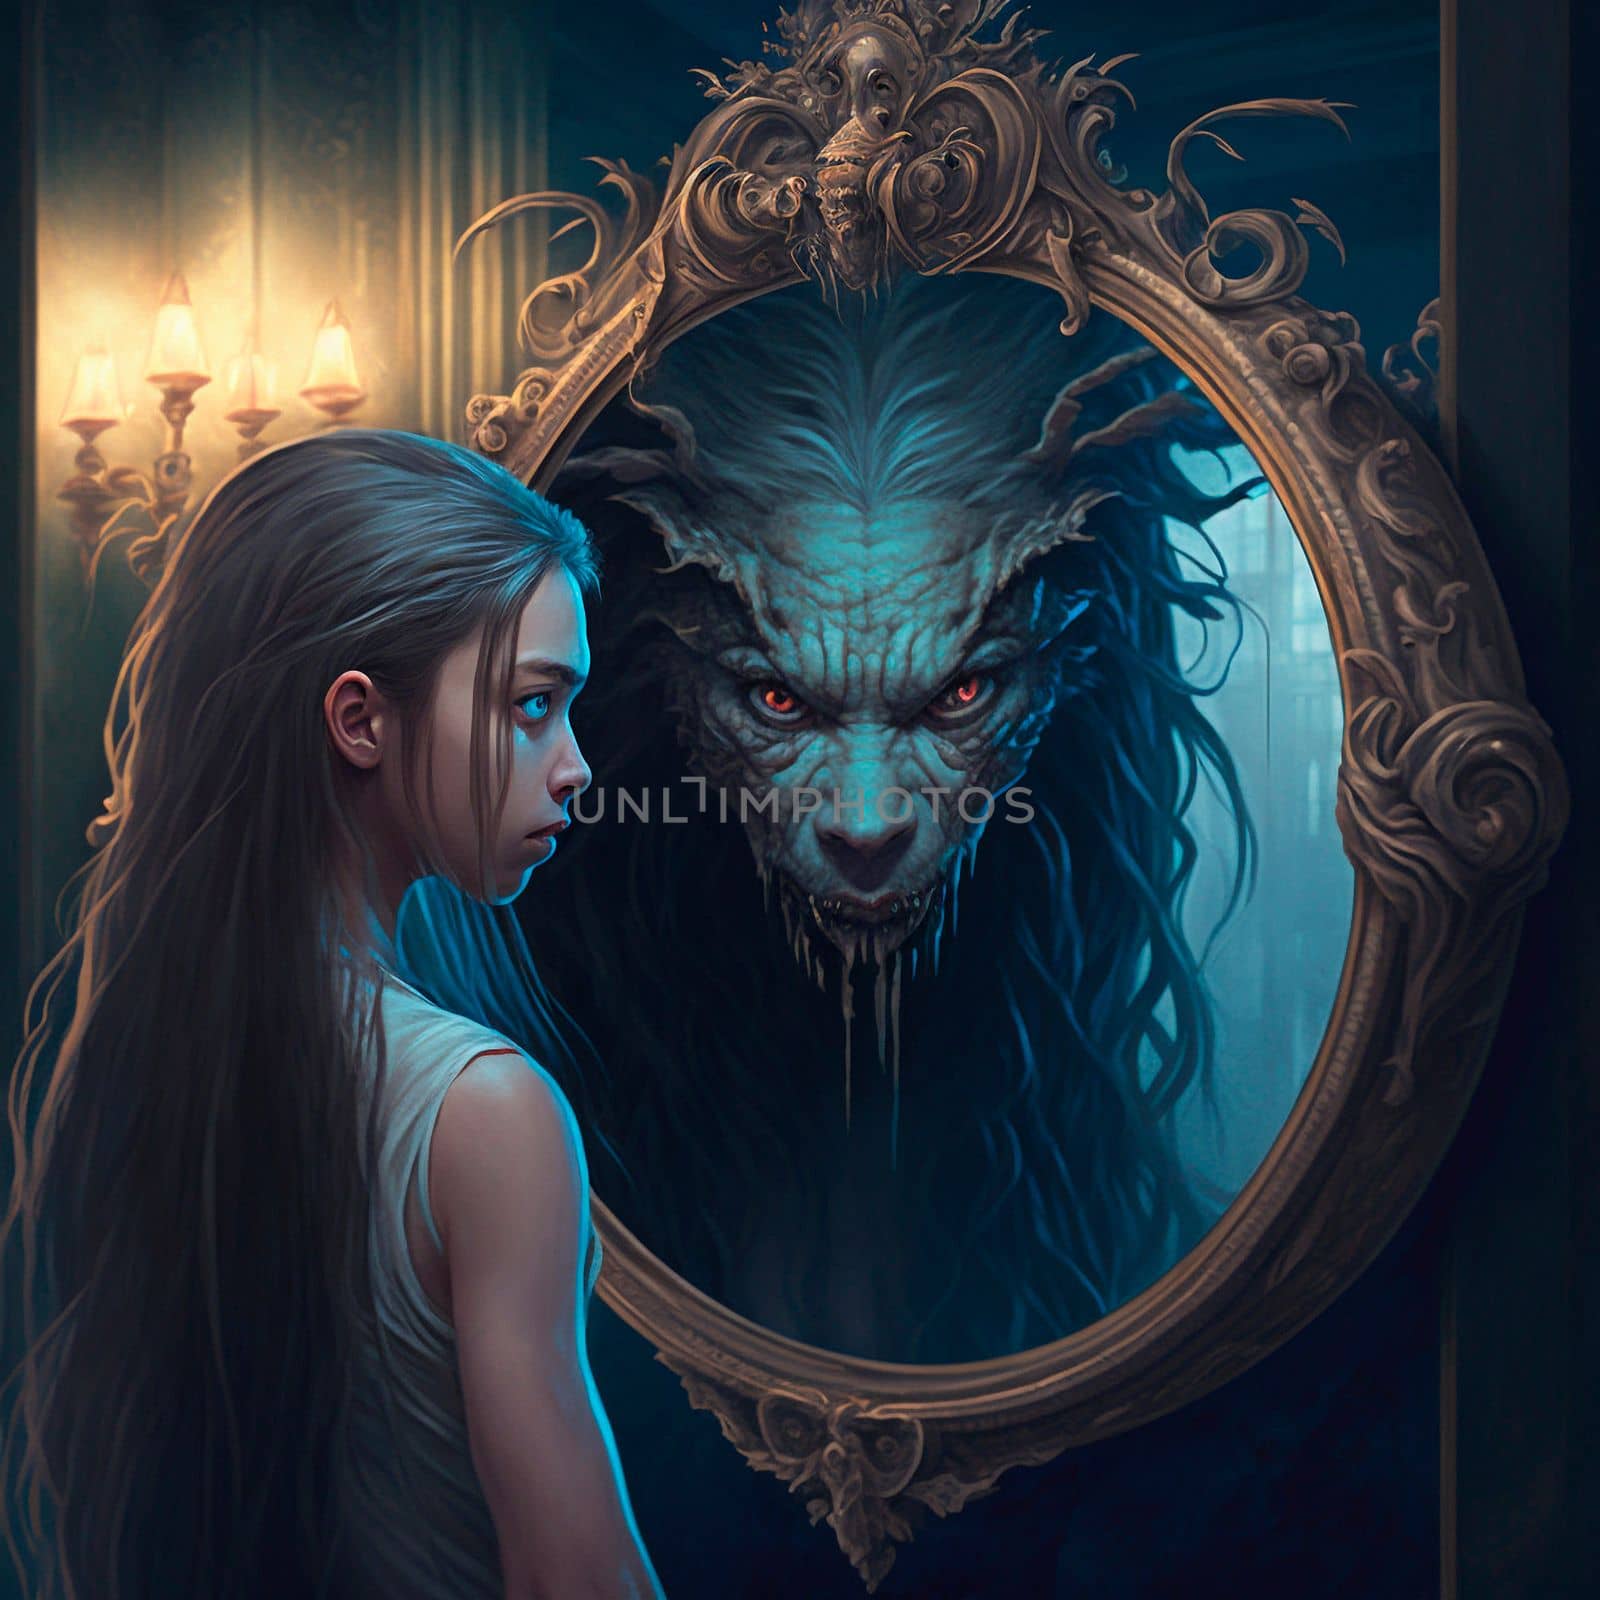 he girl sees a monster in the mirror instead of her reflection by NeuroSky